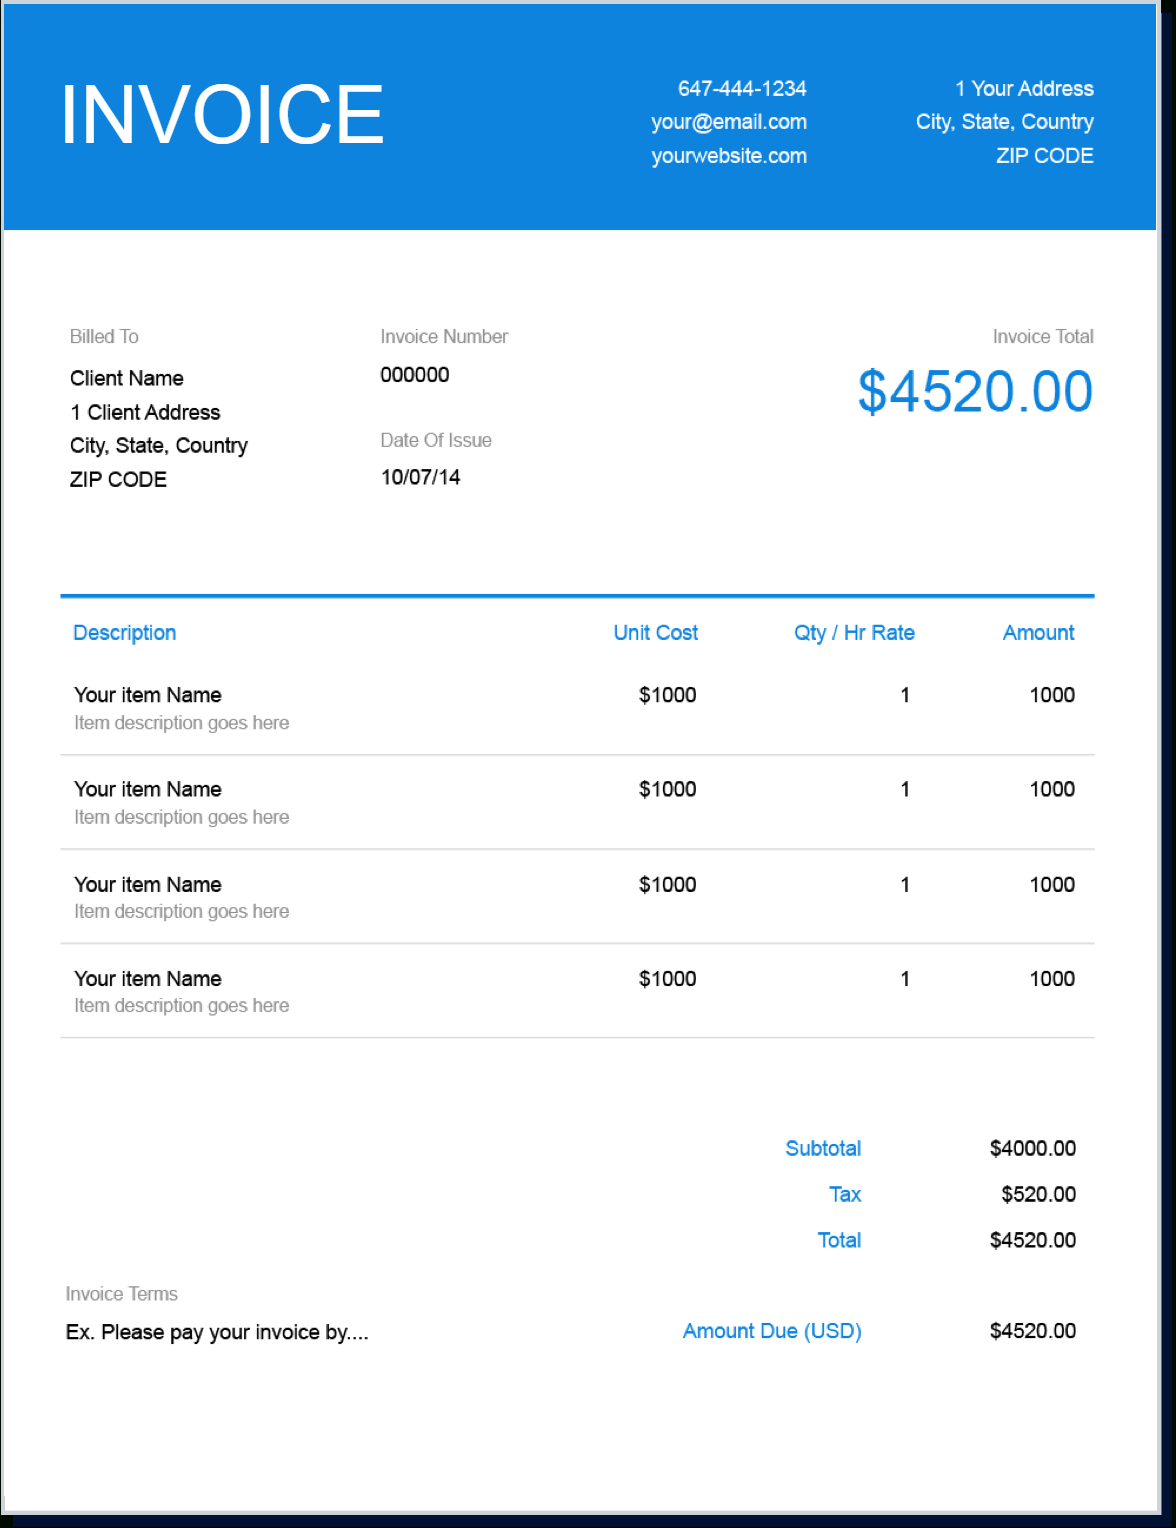 Invoice Template | Create And Send Free Invoices Instantly Intended For Download An Invoice Template